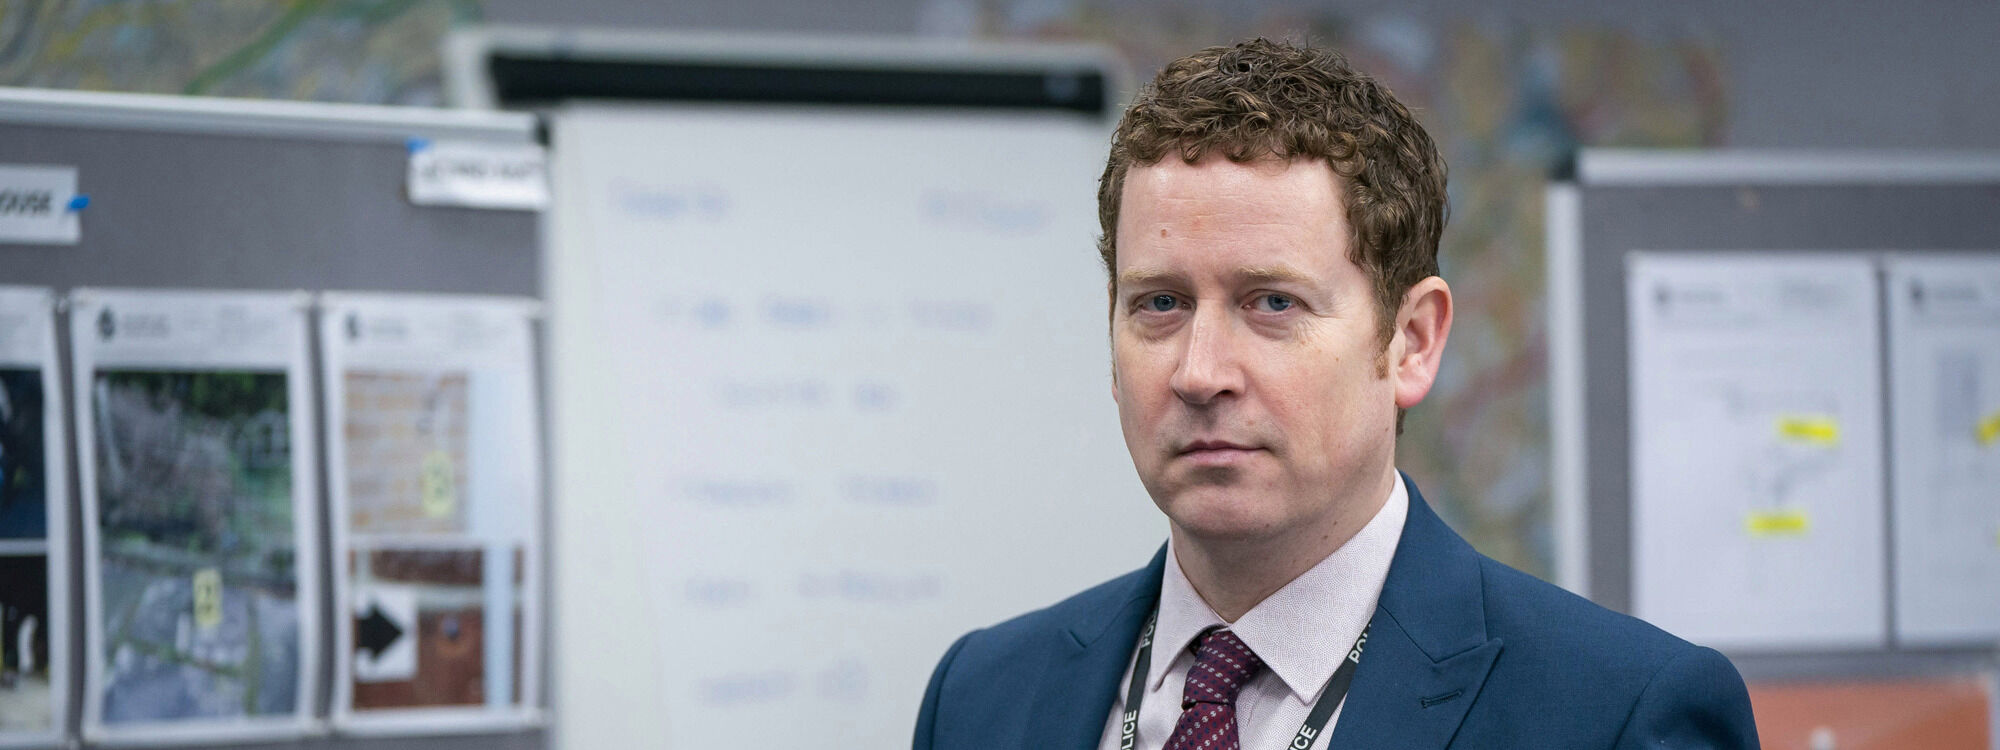 Image of Line of Duty actor Nigel Boyle in character as Ian Buckells, pictured from the chest up in the police station wearing a suit